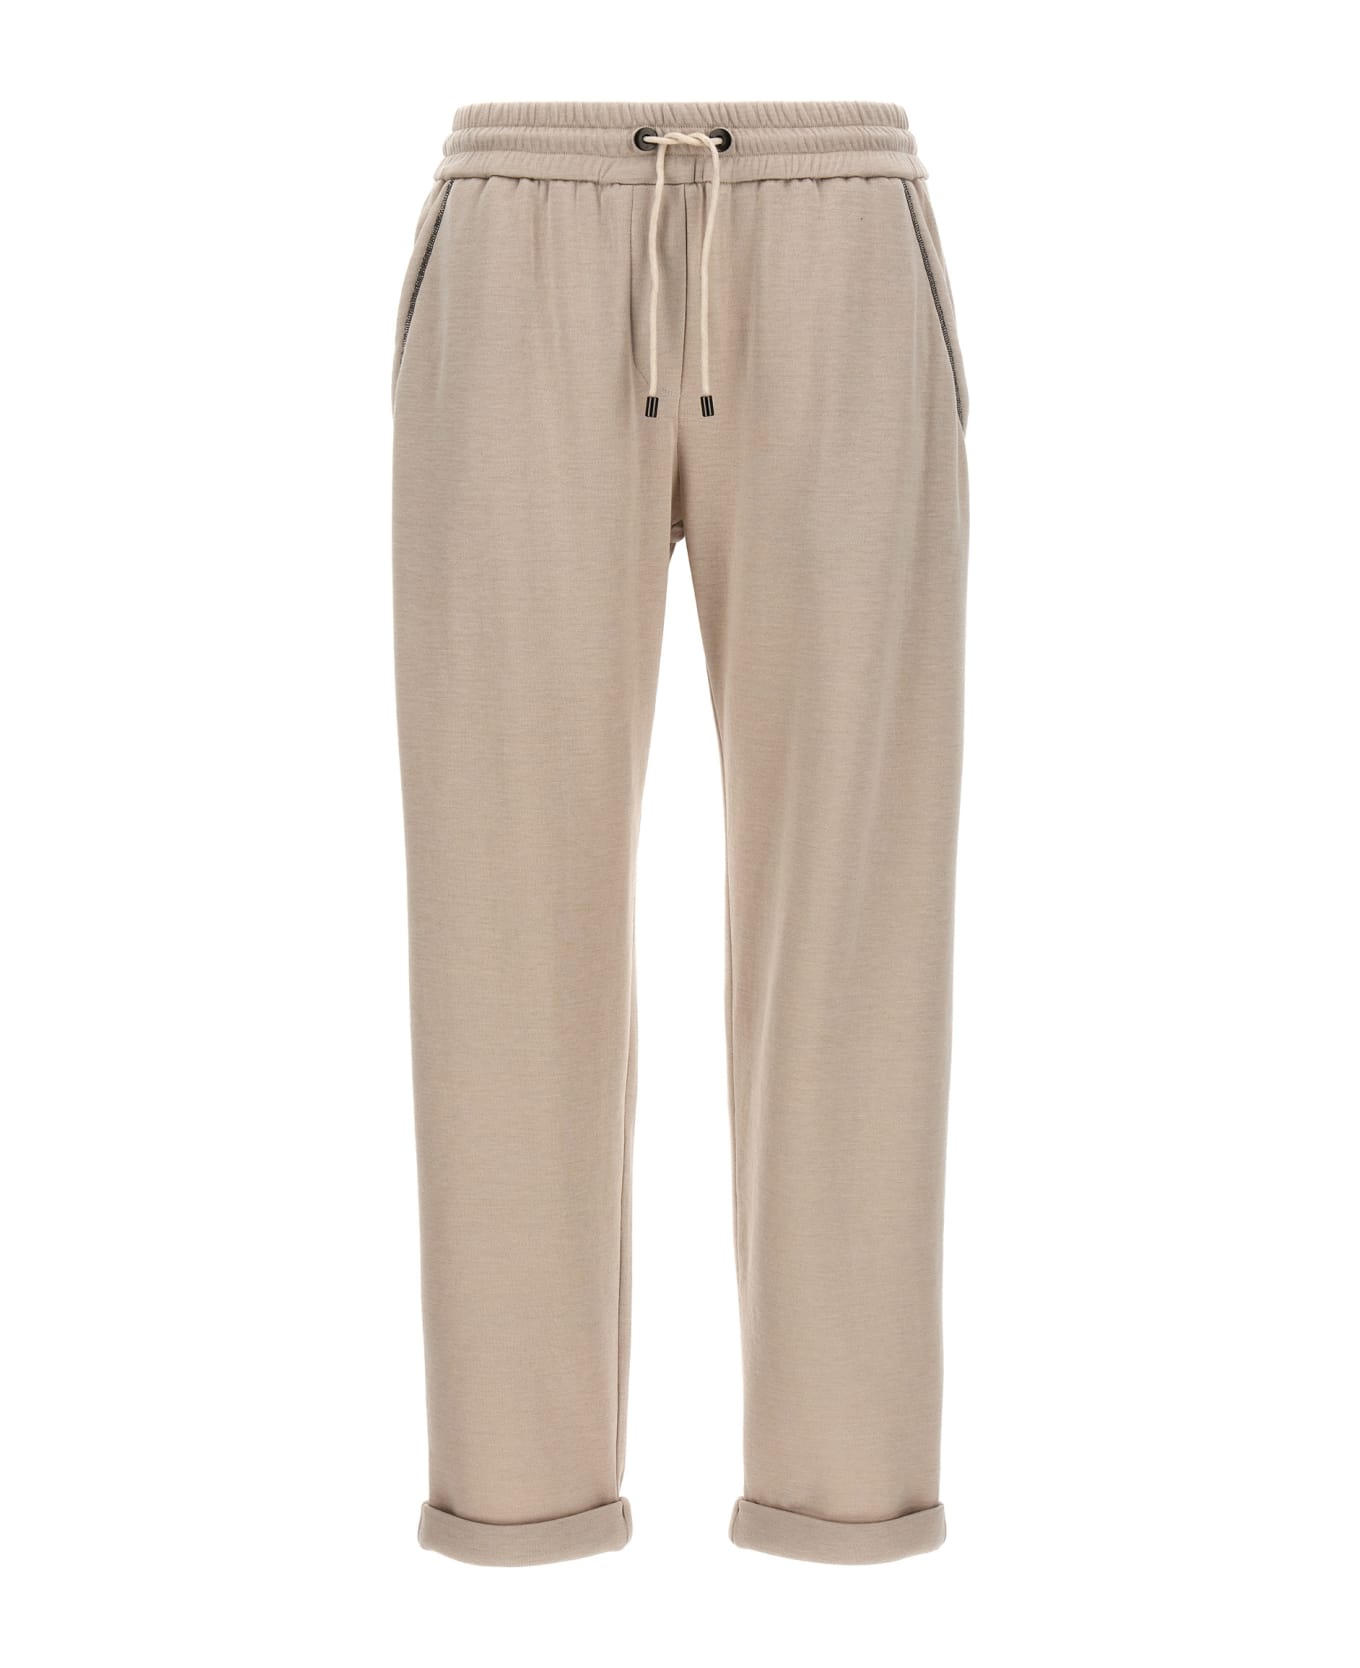 Brunello Cucinelli Pants With Drawstring And Monile Detail - Beige